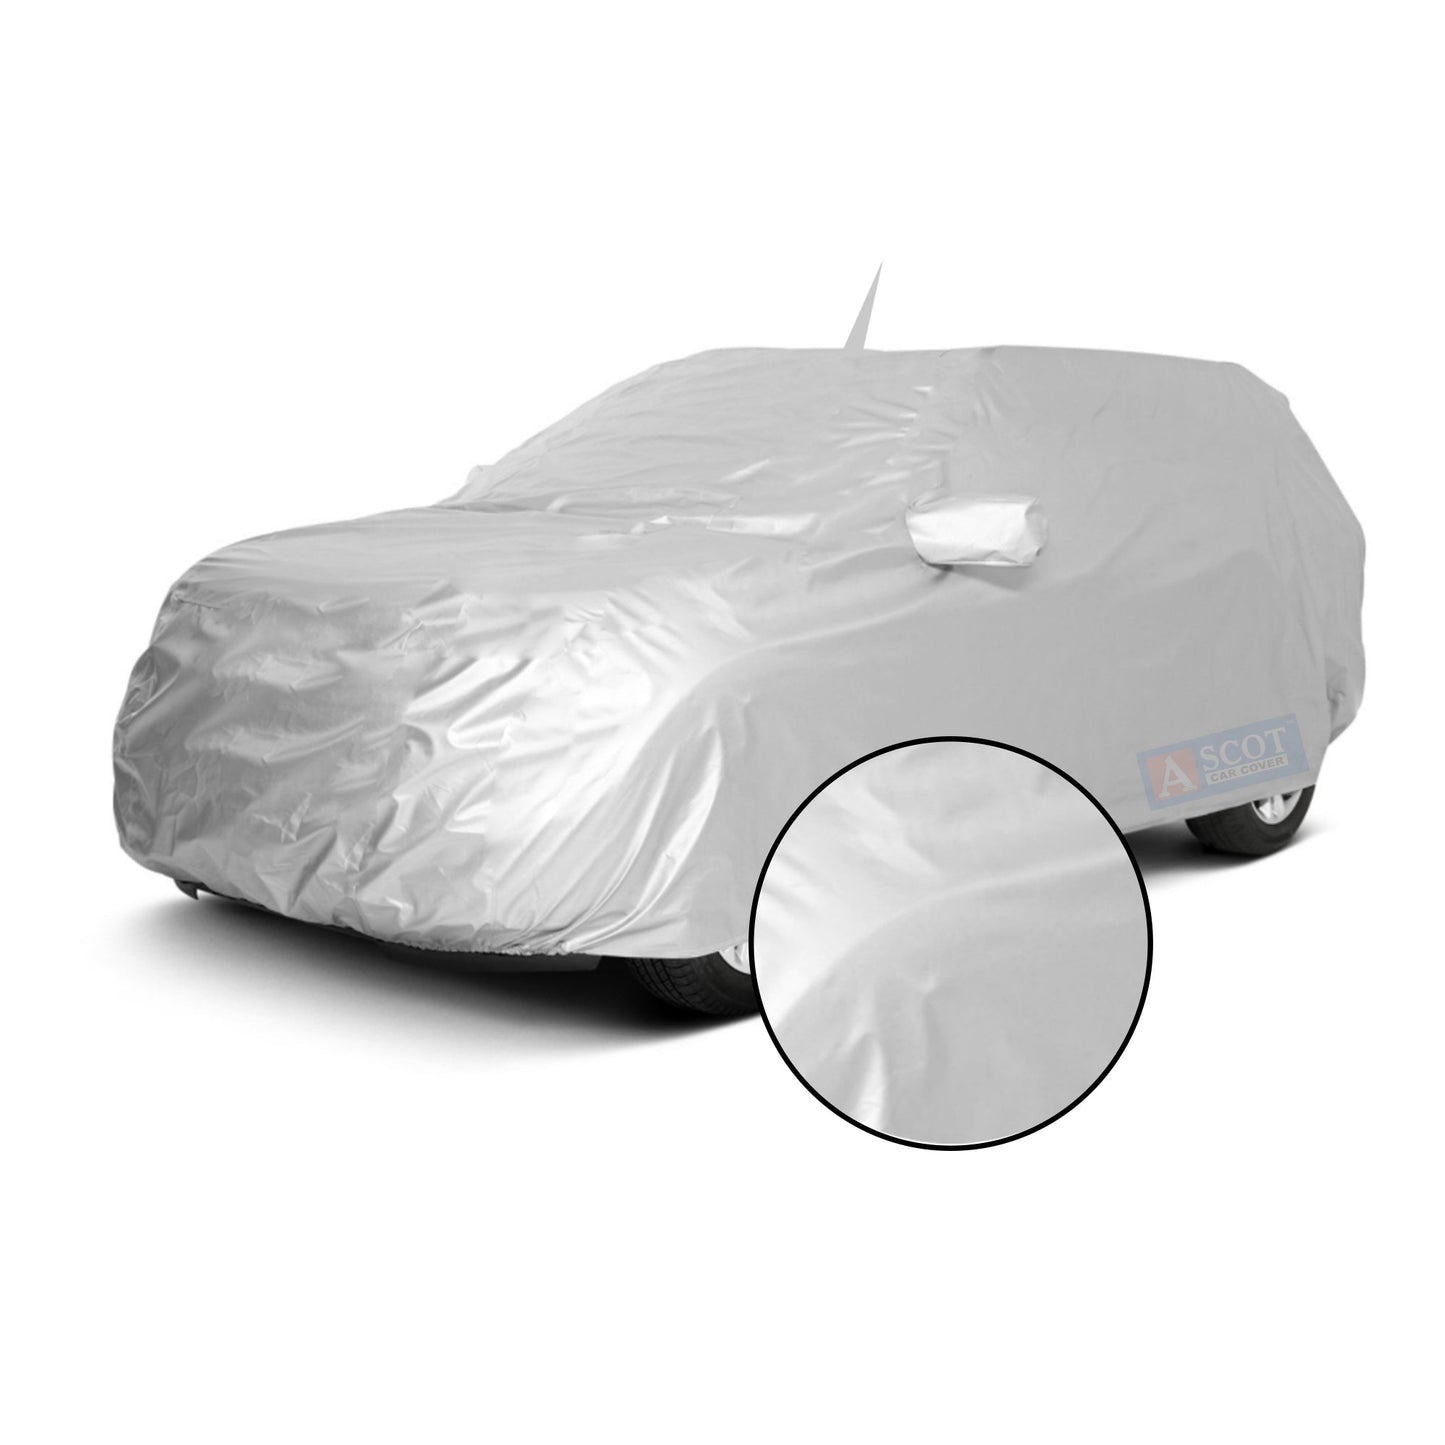 BMW Z4 Roadster 2019-2023 Model Car Body Cover Dust Proof, Trippel Stitched